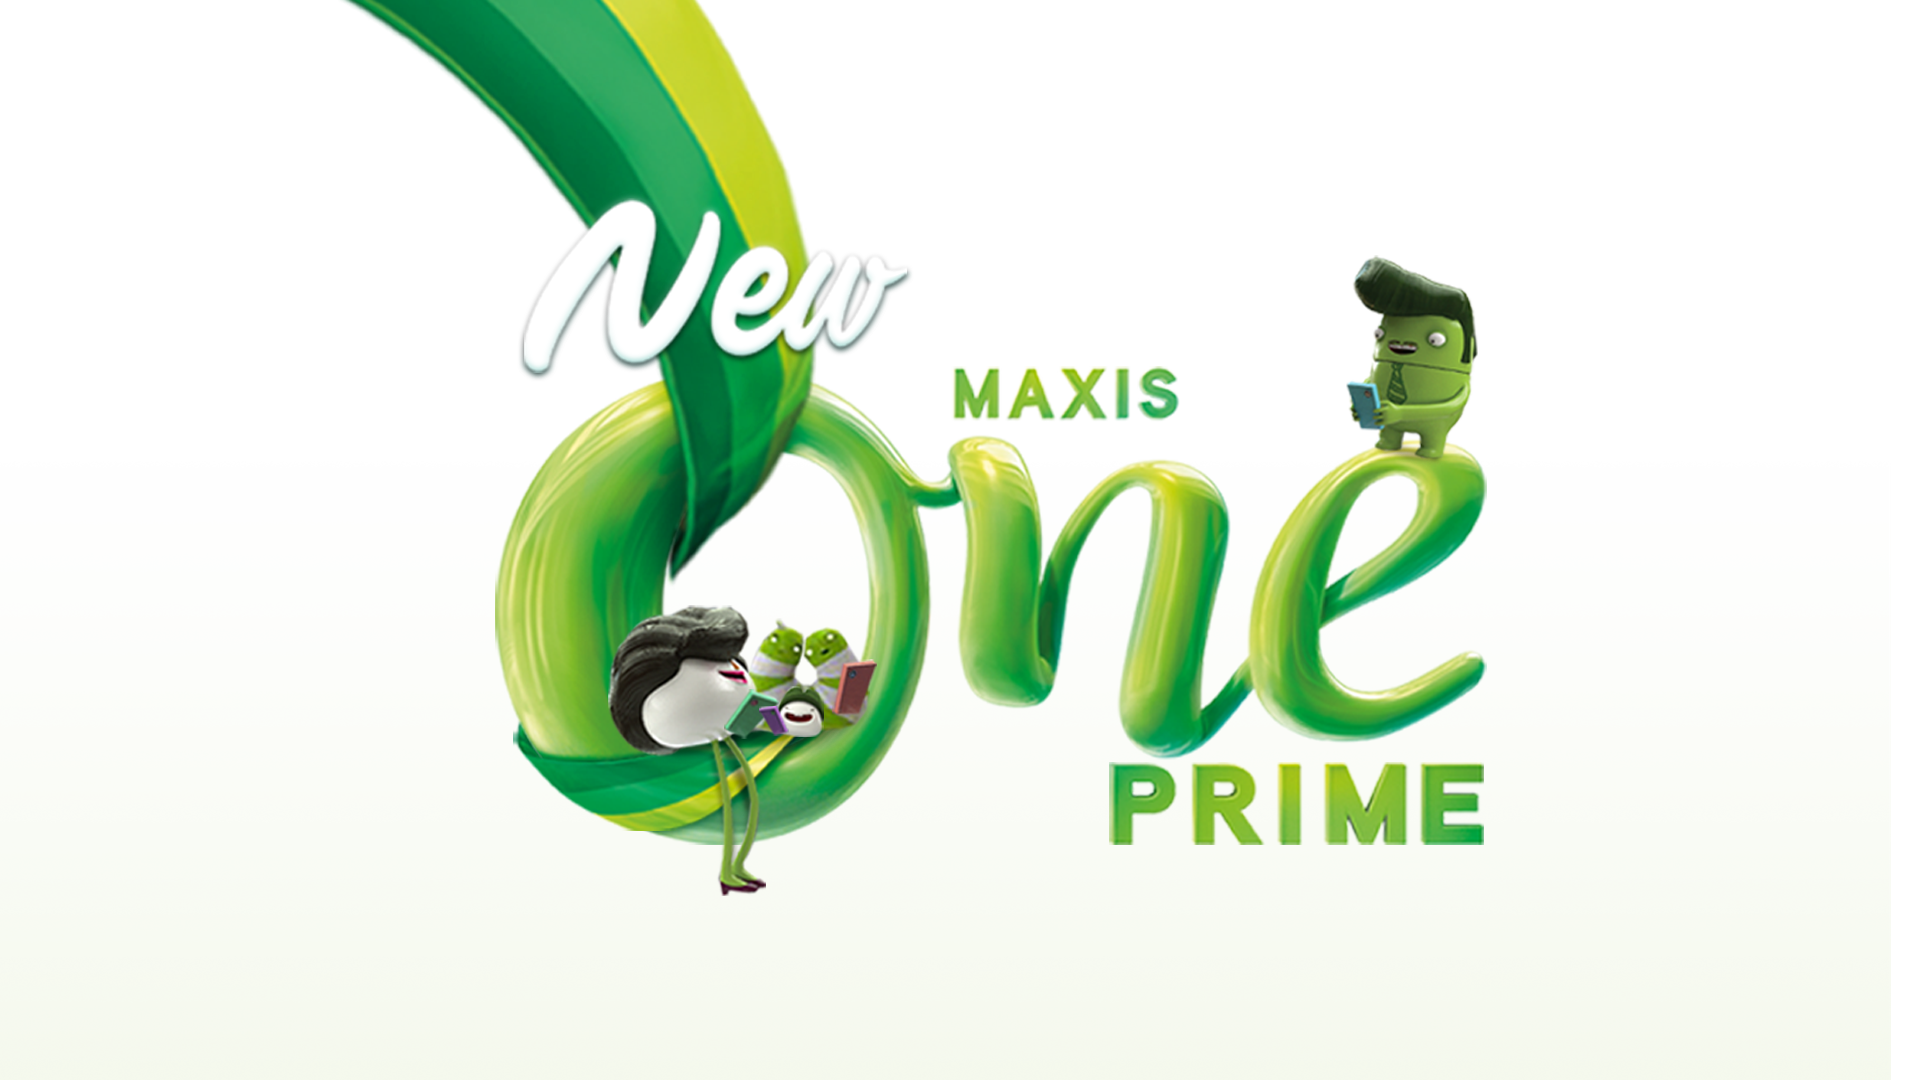 MaxisONE Prime now offers unlimited data for both mobile and home fibre plan